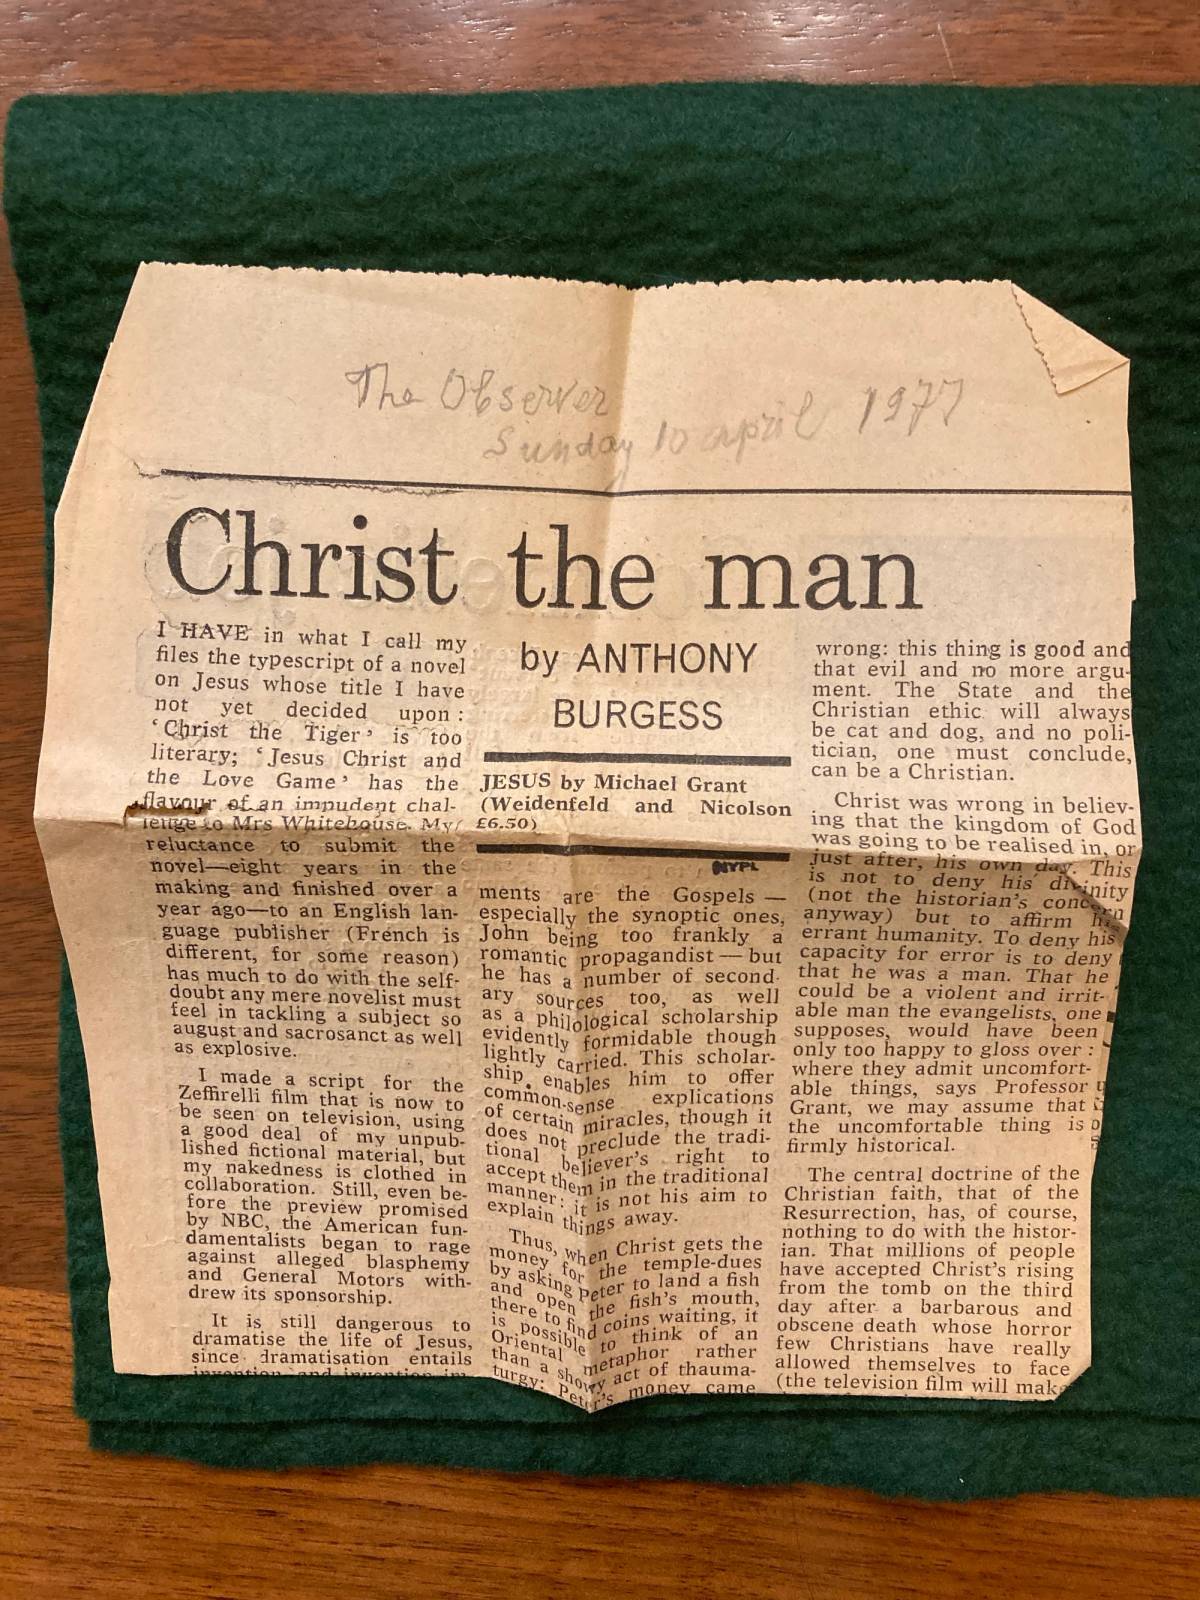 Clipping from The Observer, Sunday, April 10, 1977, with Anthony Burgess’ review of 'Jesus' by Michael Grant, left inside Vladimir Nabokov’s weekly planner for 1977